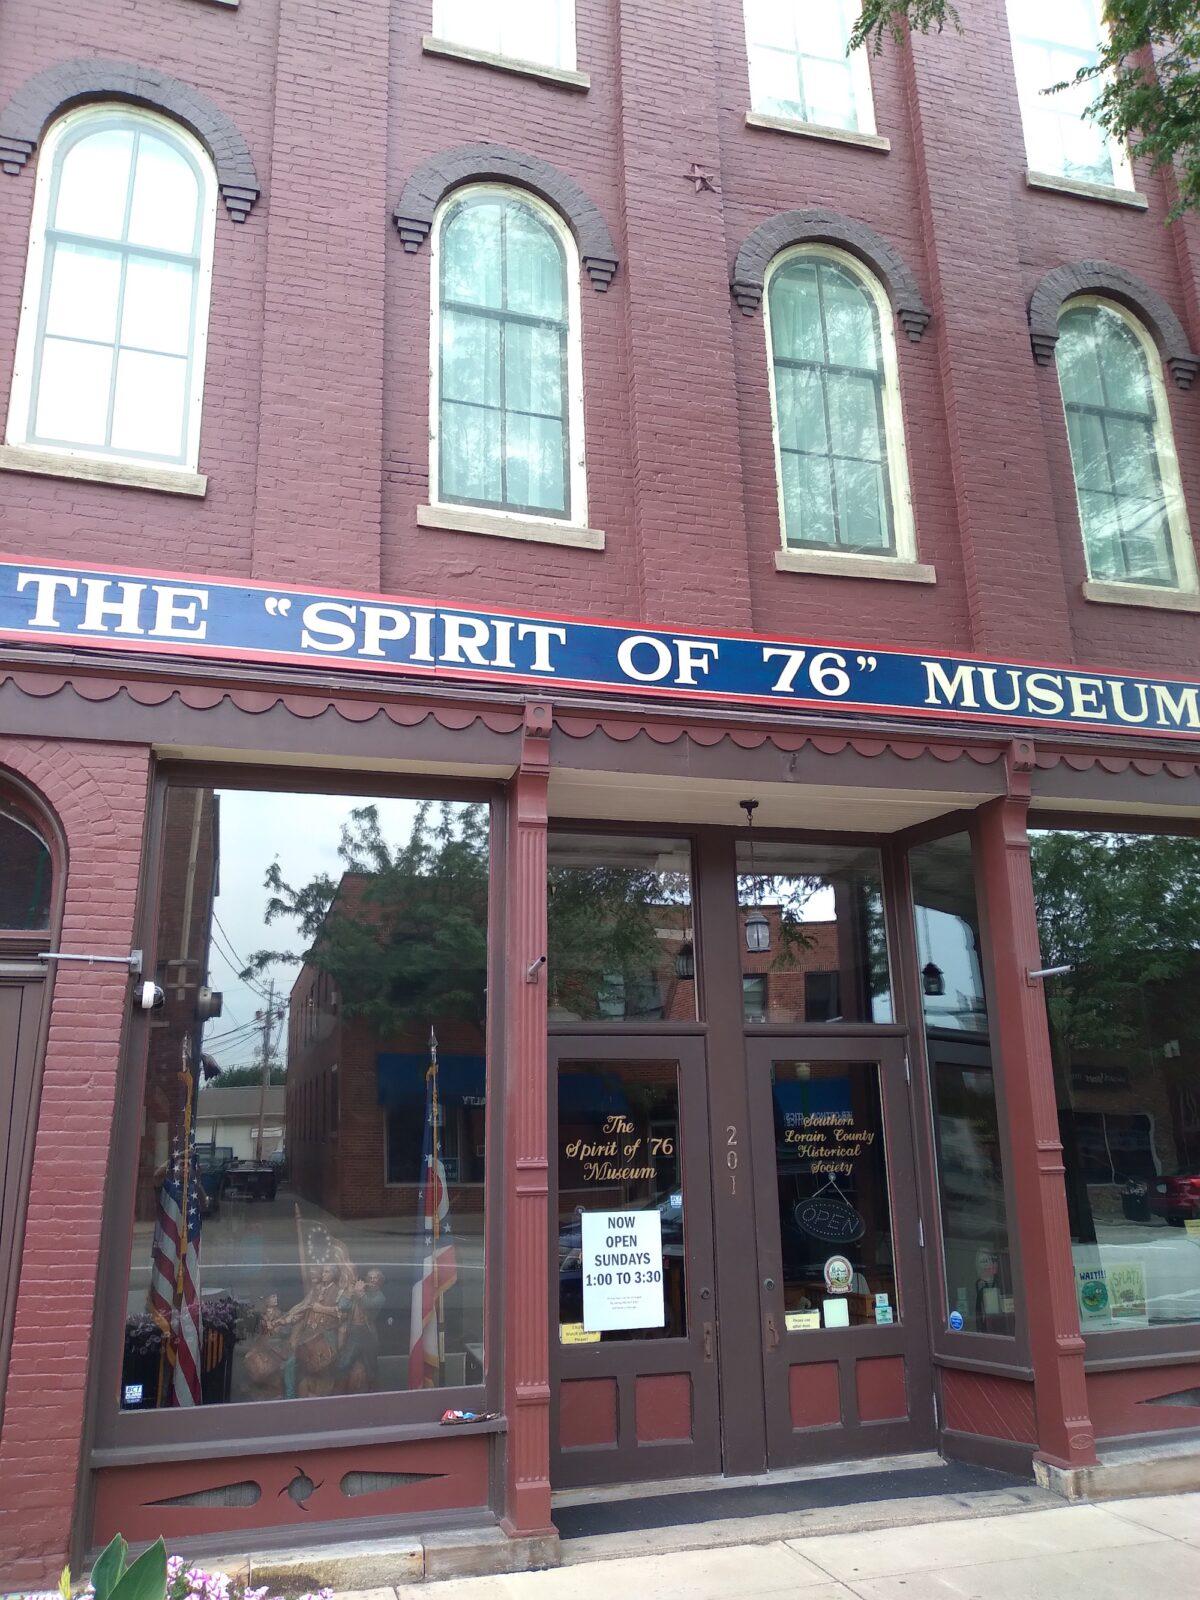 The Spirit of '76 Museum in Wellington, Ohio, pays tribute to artist Archibald M. Willard who lived in Wellington and rendered the famous "Spirit of '76" painting of three patriots giving tribute to the American Revolution—a popular image during the U.S.'s Bicentennial celebration in 1976. (Michael Sakal)